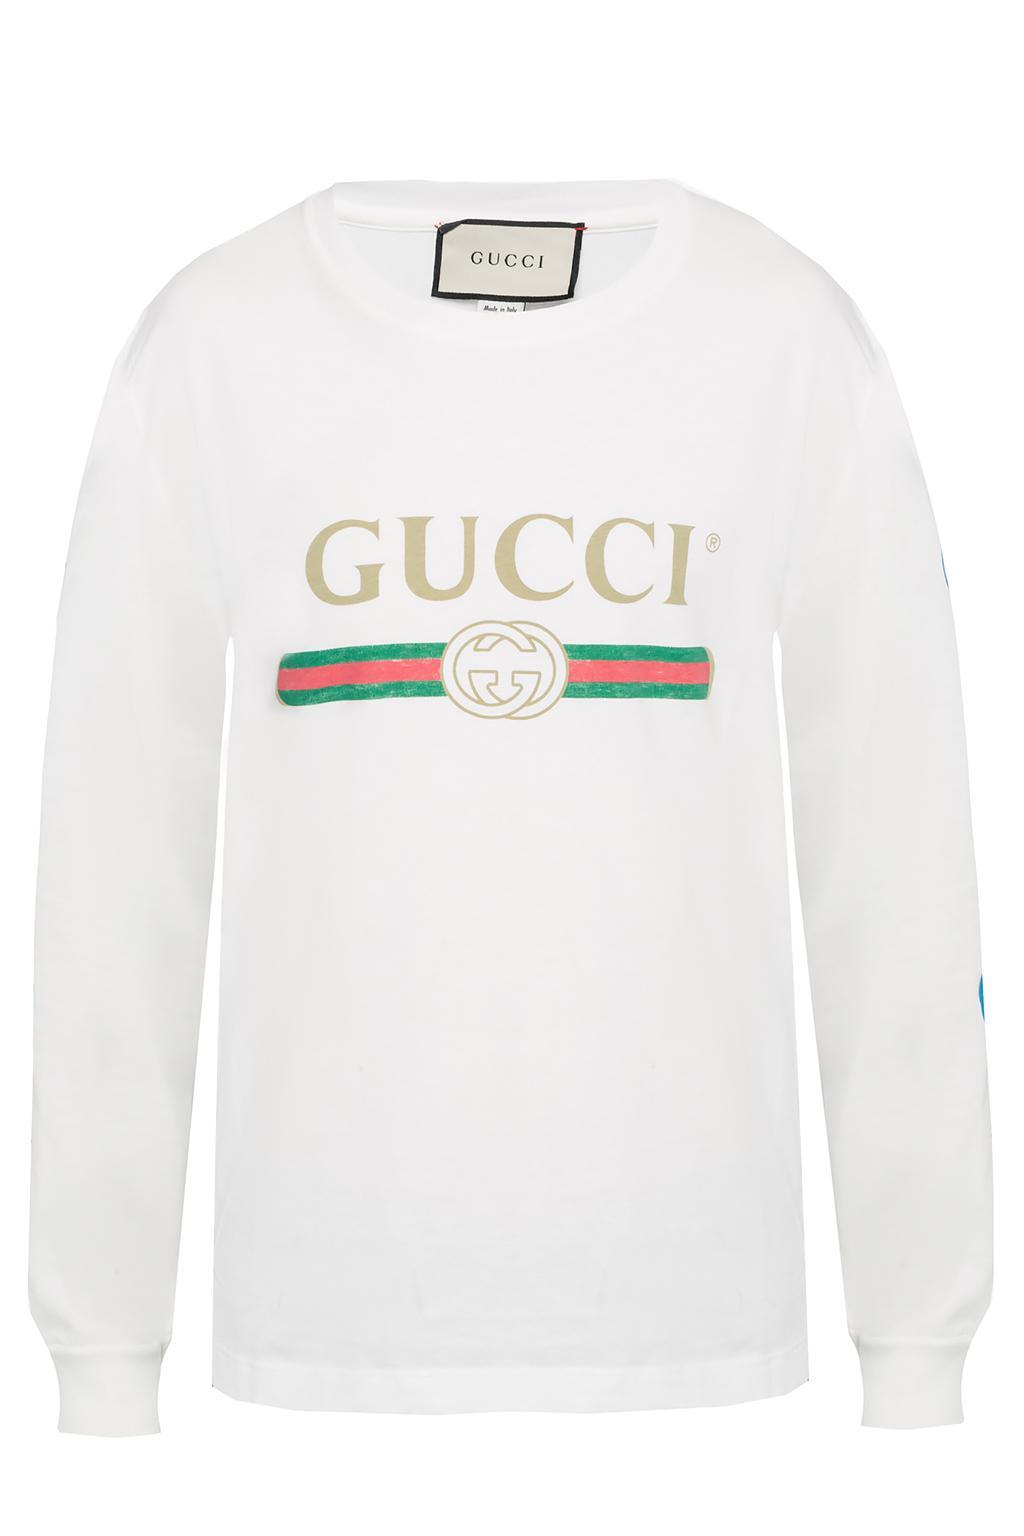 Gucci Dragon-embroidered Cotton Long-sleeve T-shirt in White for Men | Lyst